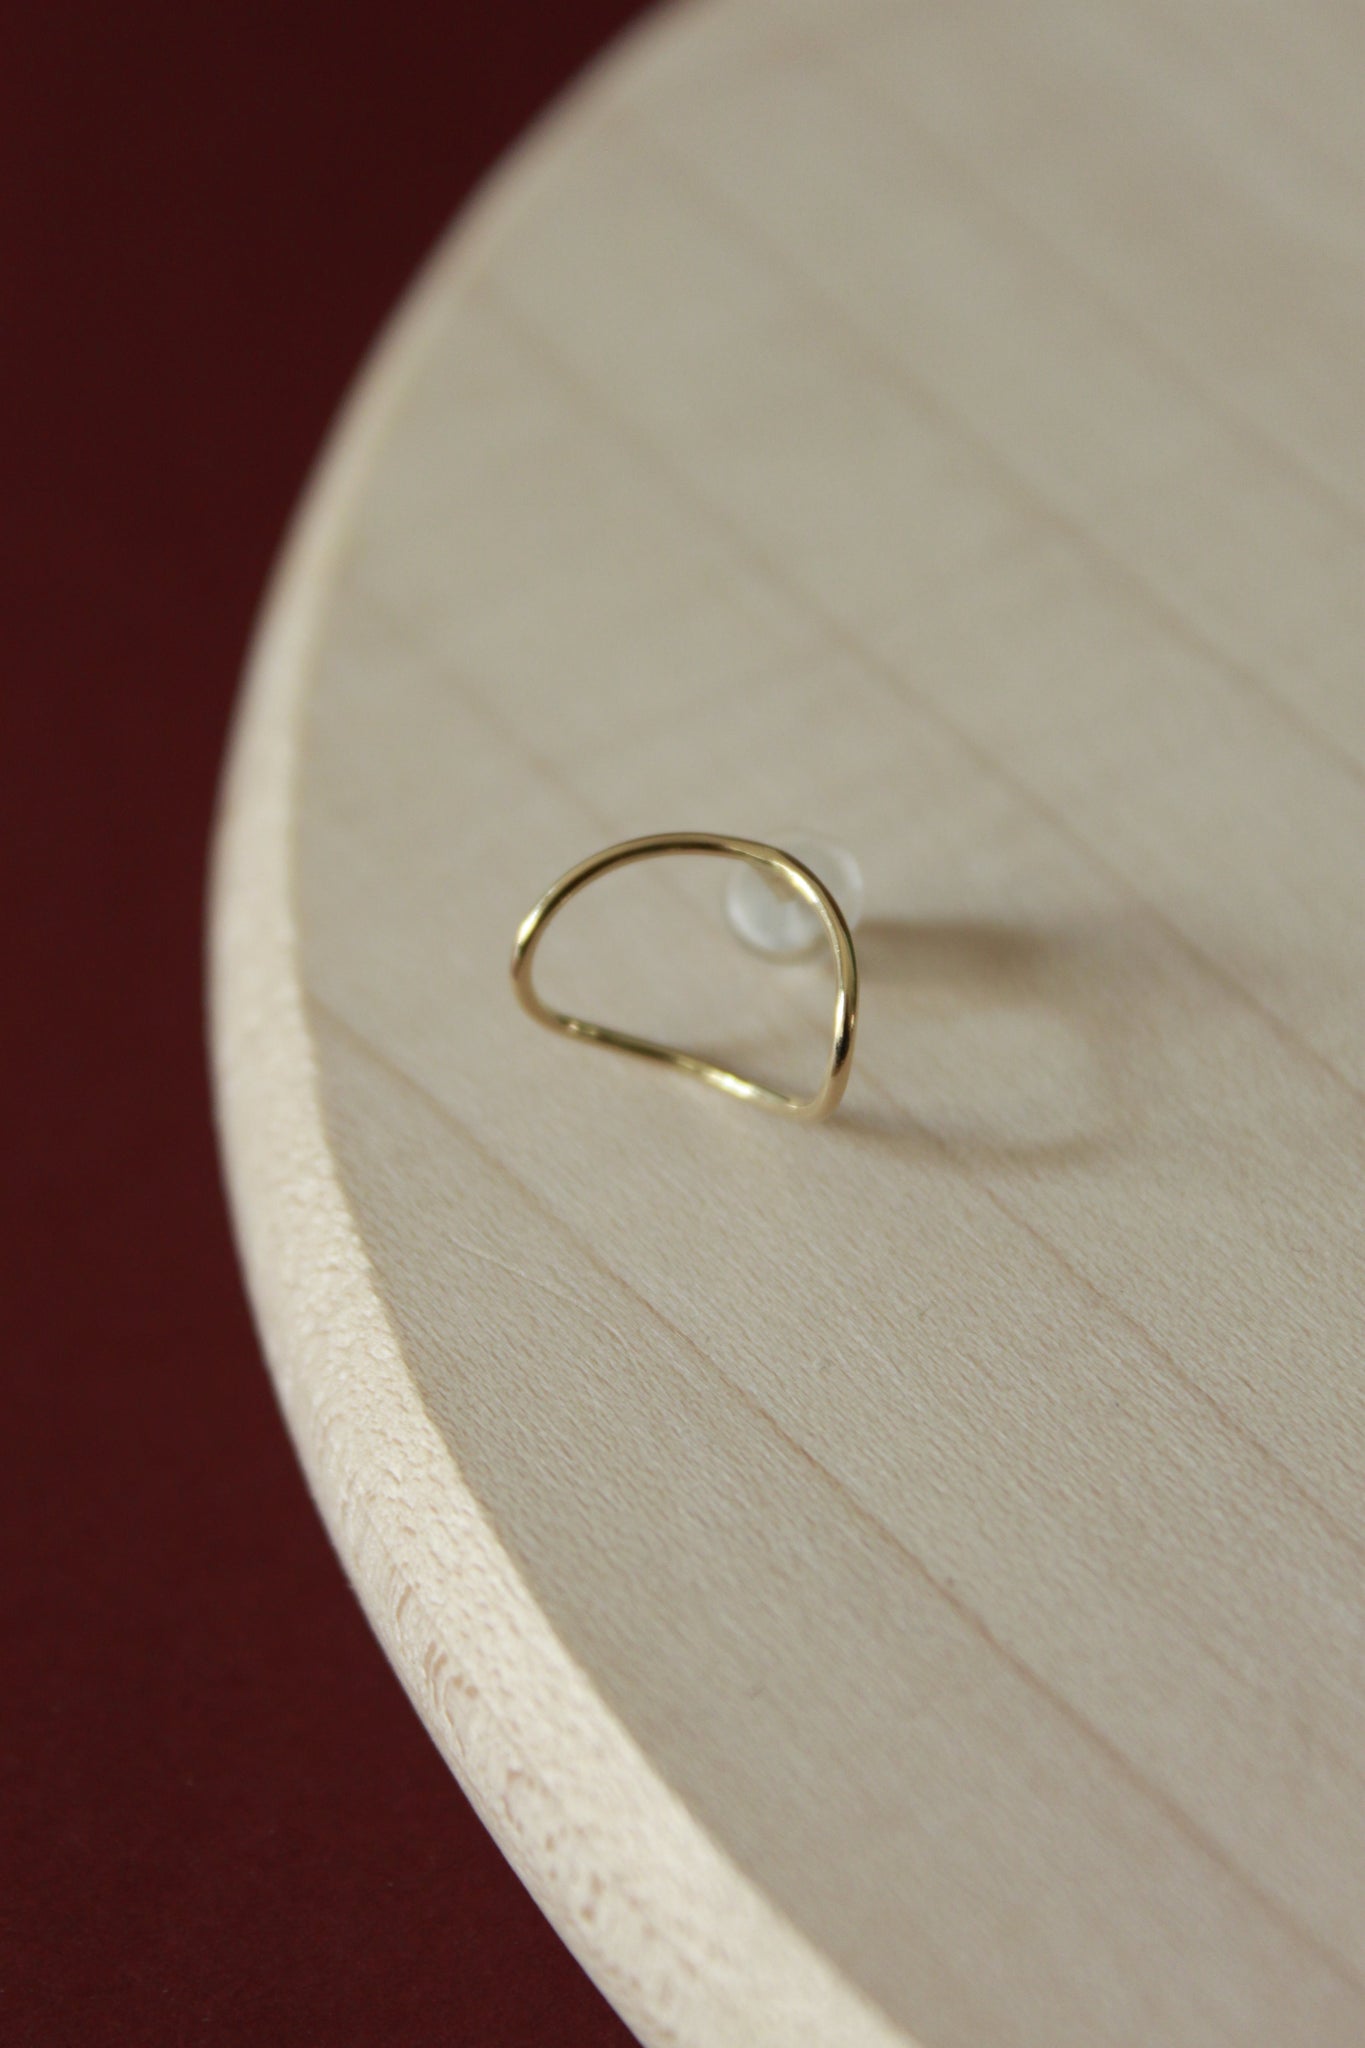 Earring Oval Small | golden curl